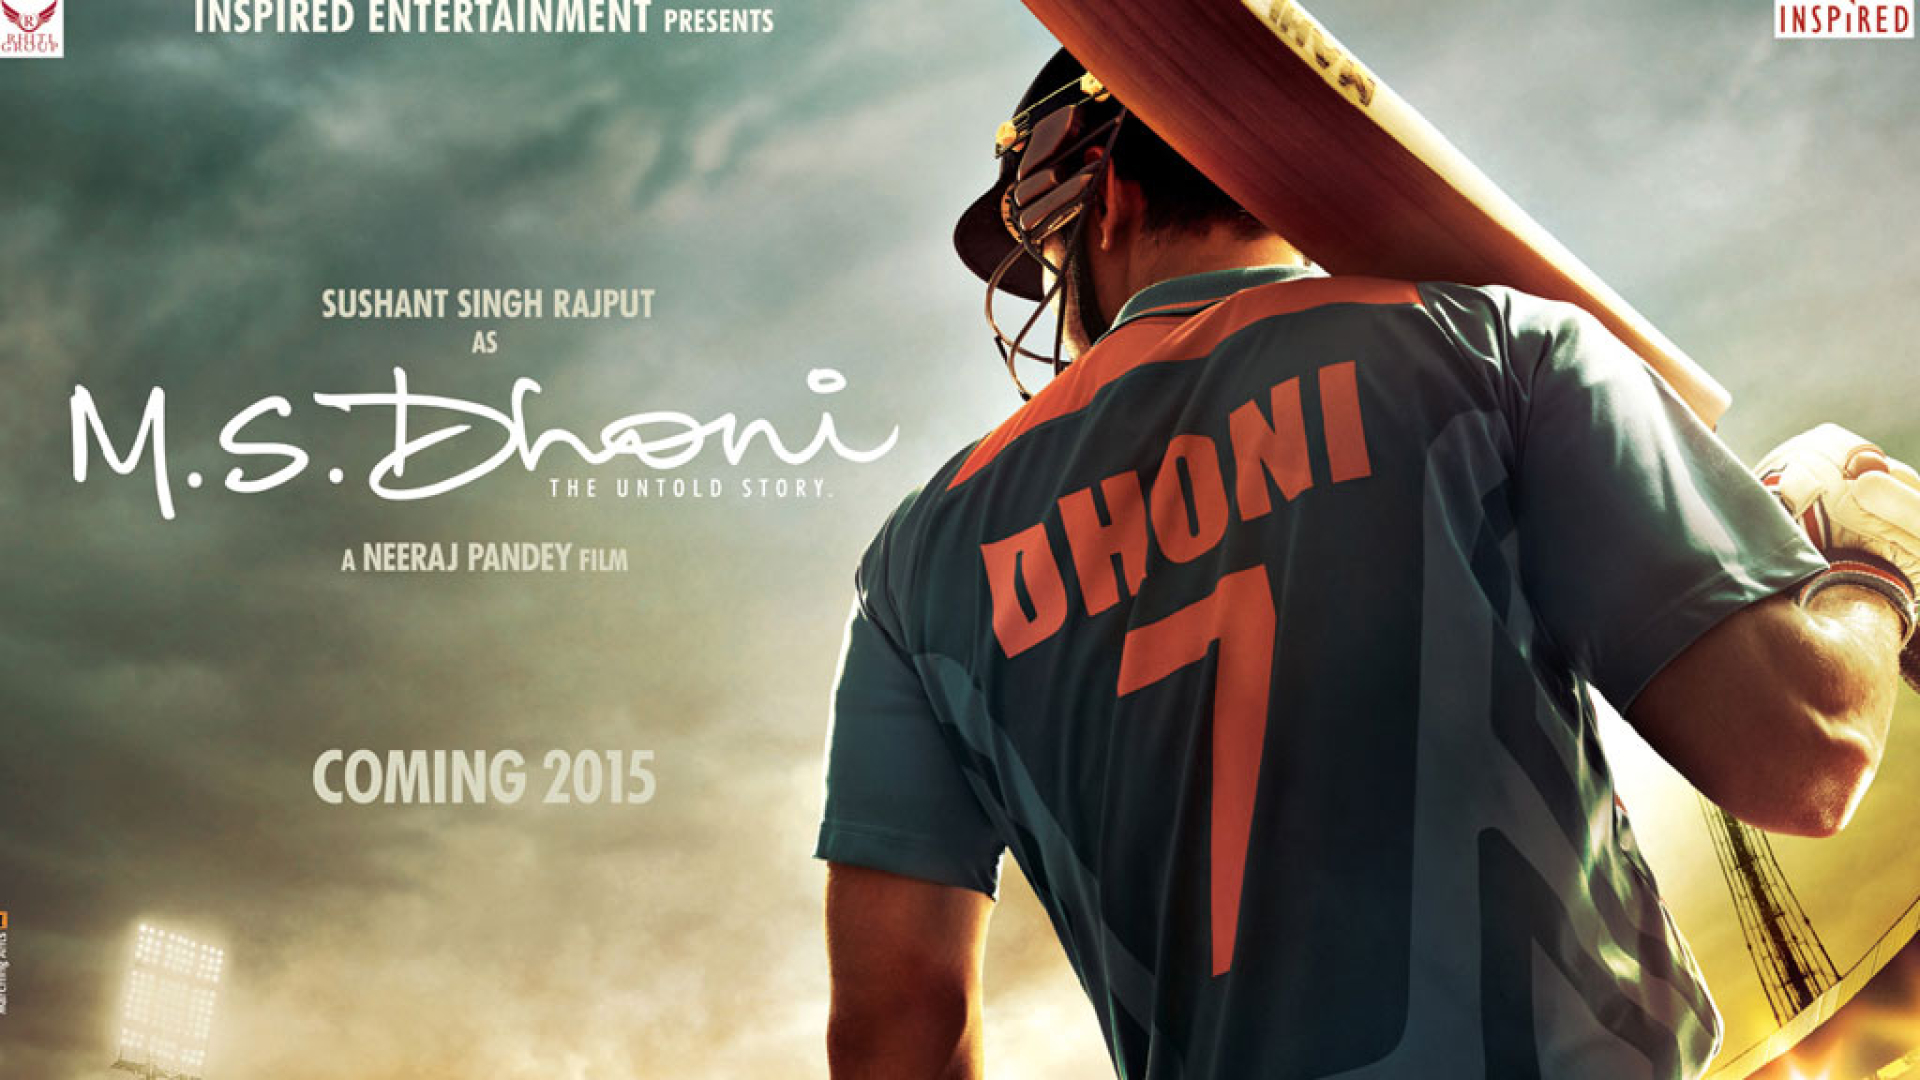 1920x1080 MS Dhoni Untold Story Poster 1080P Laptop Full HD Wallpaper, HD  Movies 4K Wallpapers, Images, Photos and Background - Wallpapers Den